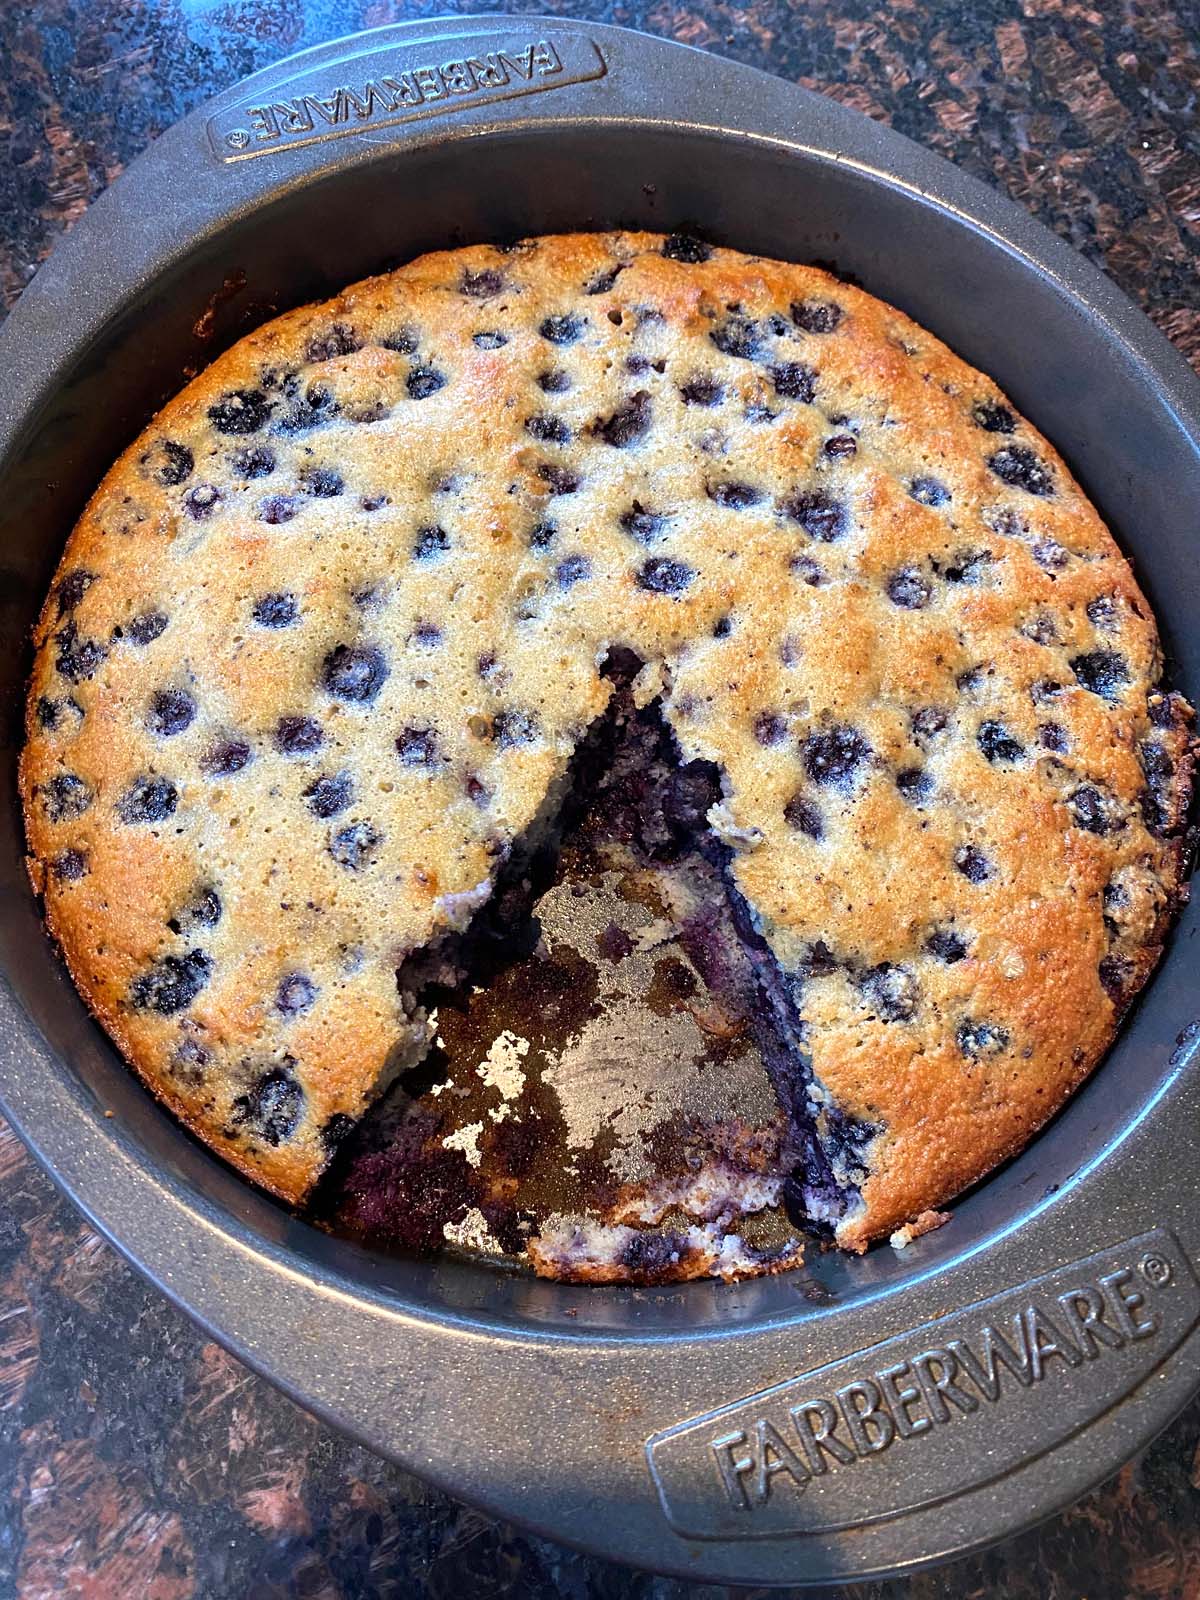 Baked gluten free blueberry cake in the pan with a slice missing.